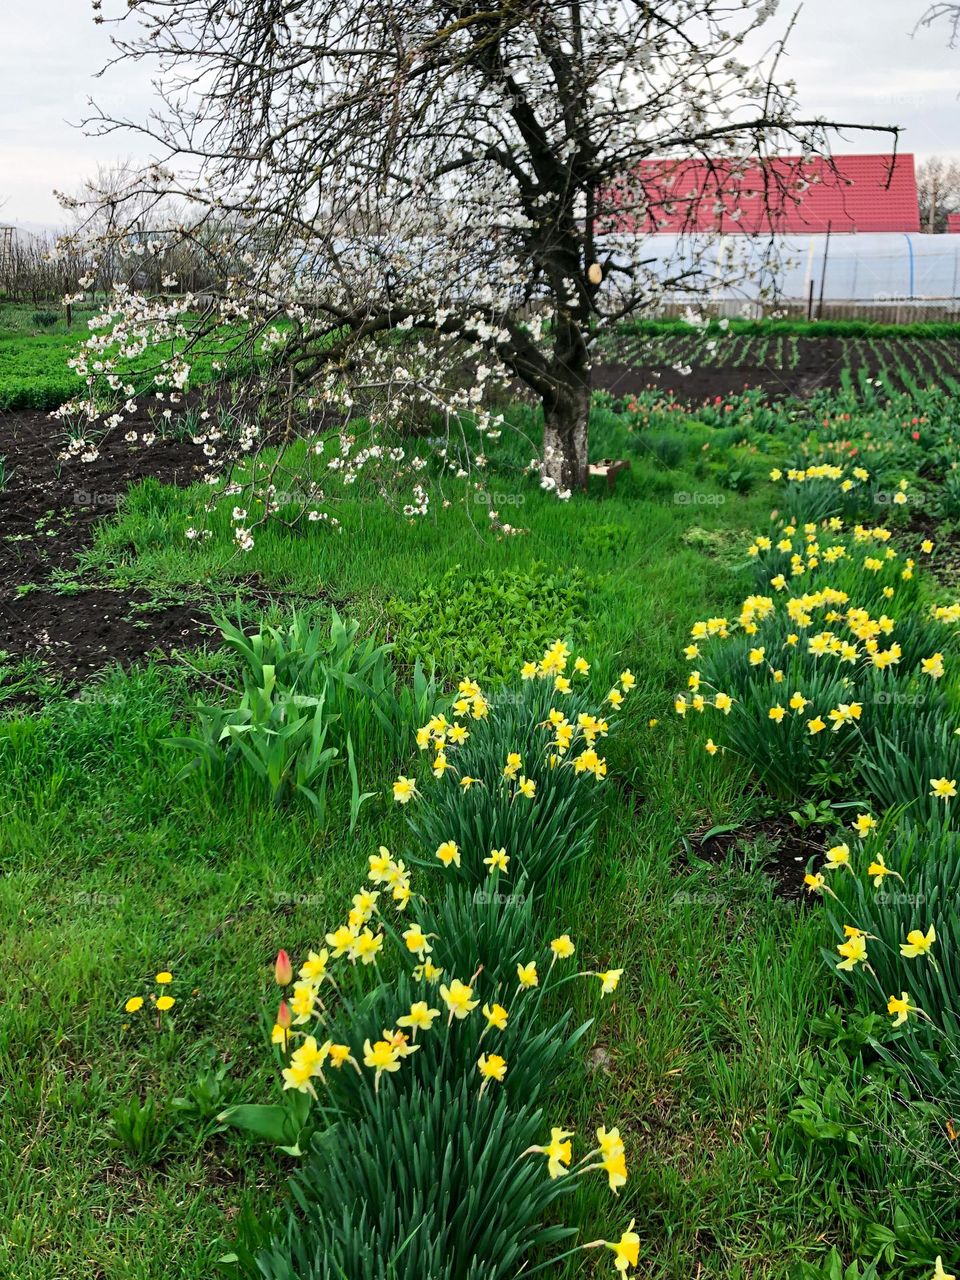 Blossoming cherry, green glass and yellow daffodils